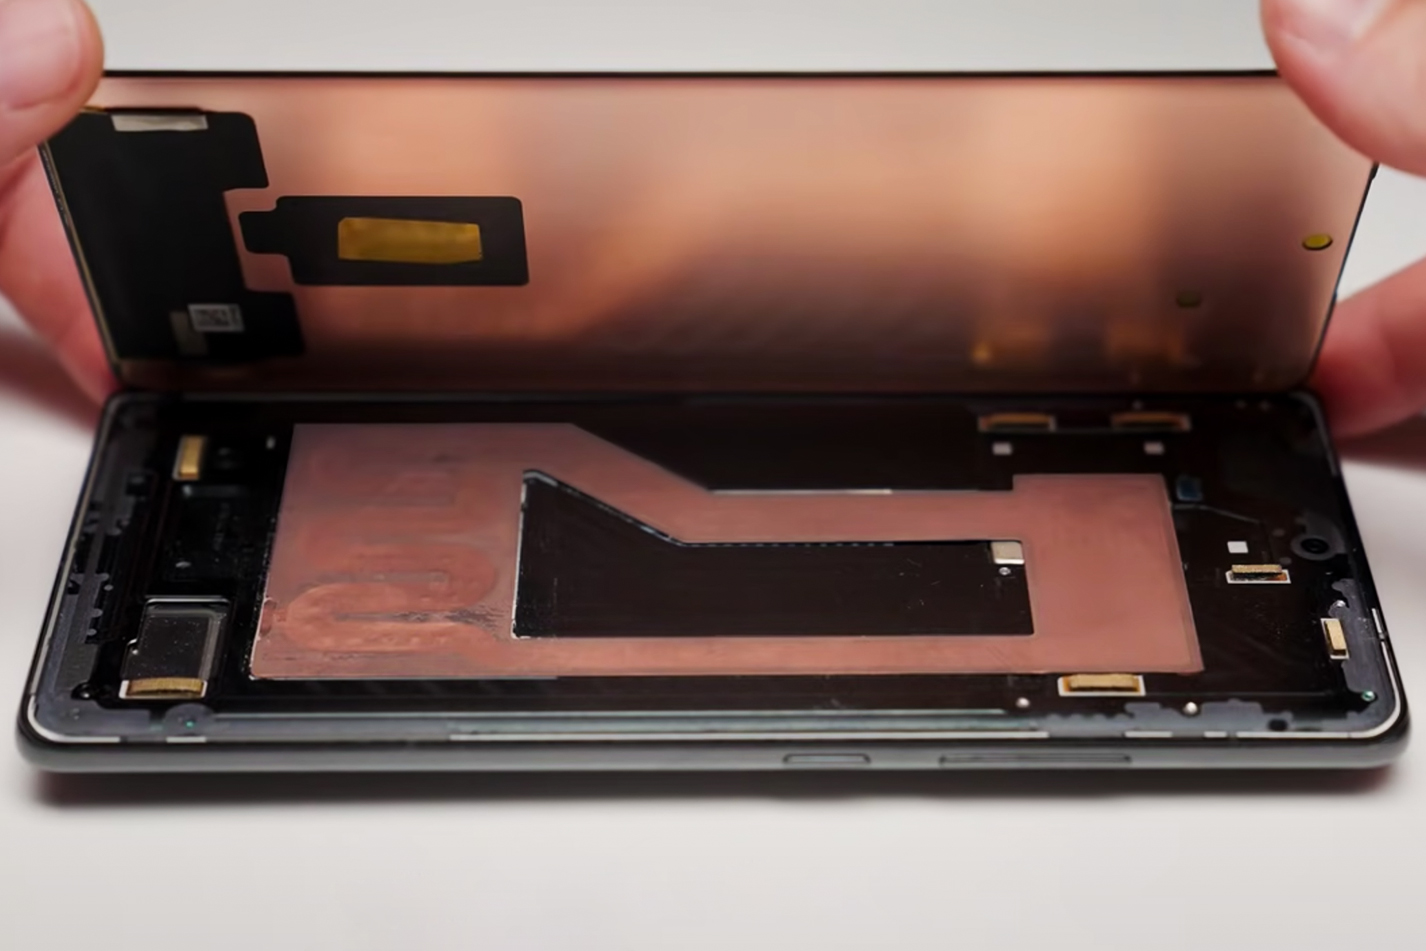 How vapor cooling helps to keep your smartphone from overheating | Virtual Tendencies